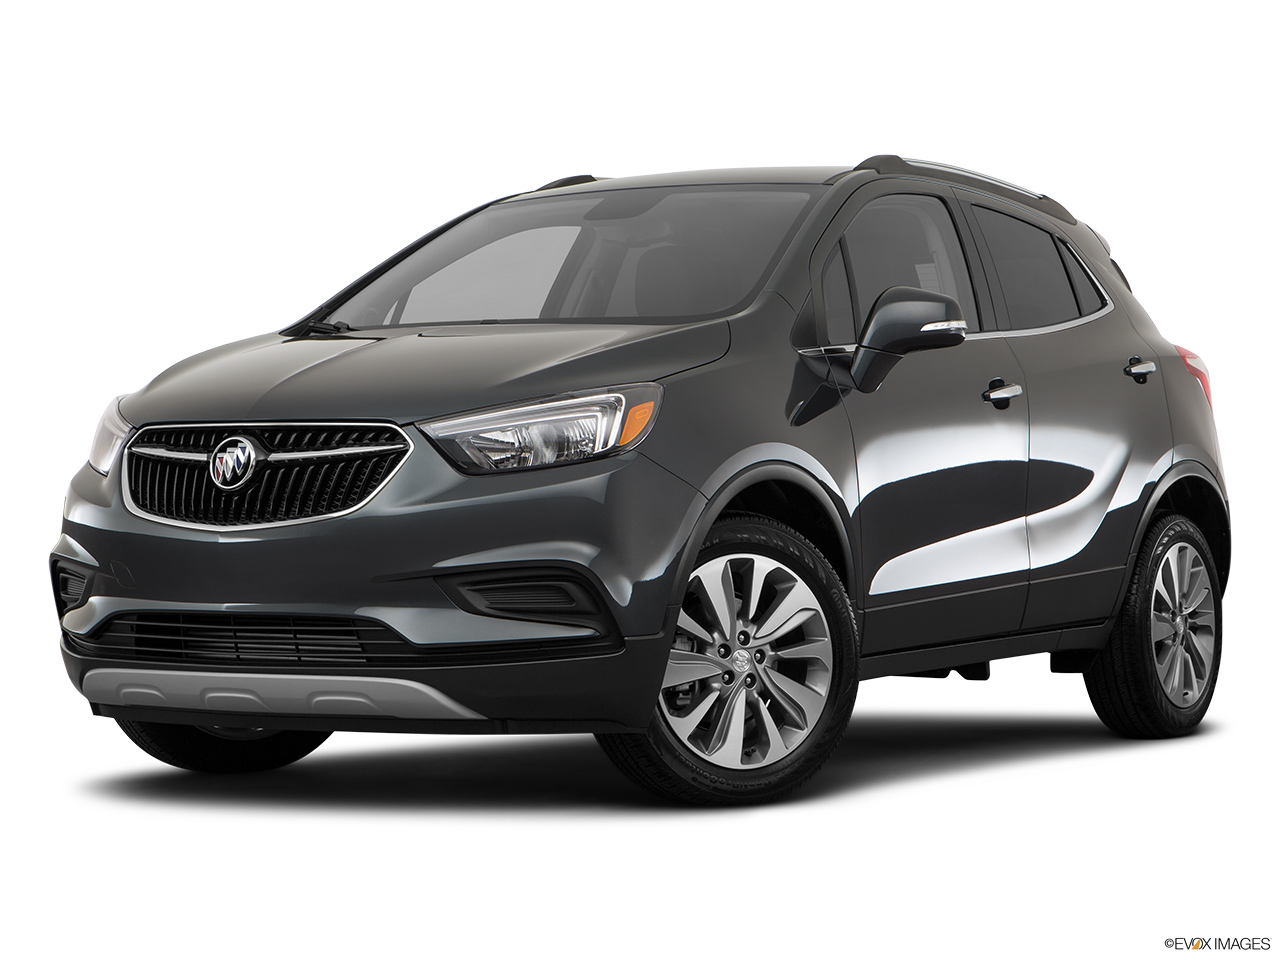 Cheapest SUV Canada Most Affordable Options in The Market LeaseCosts